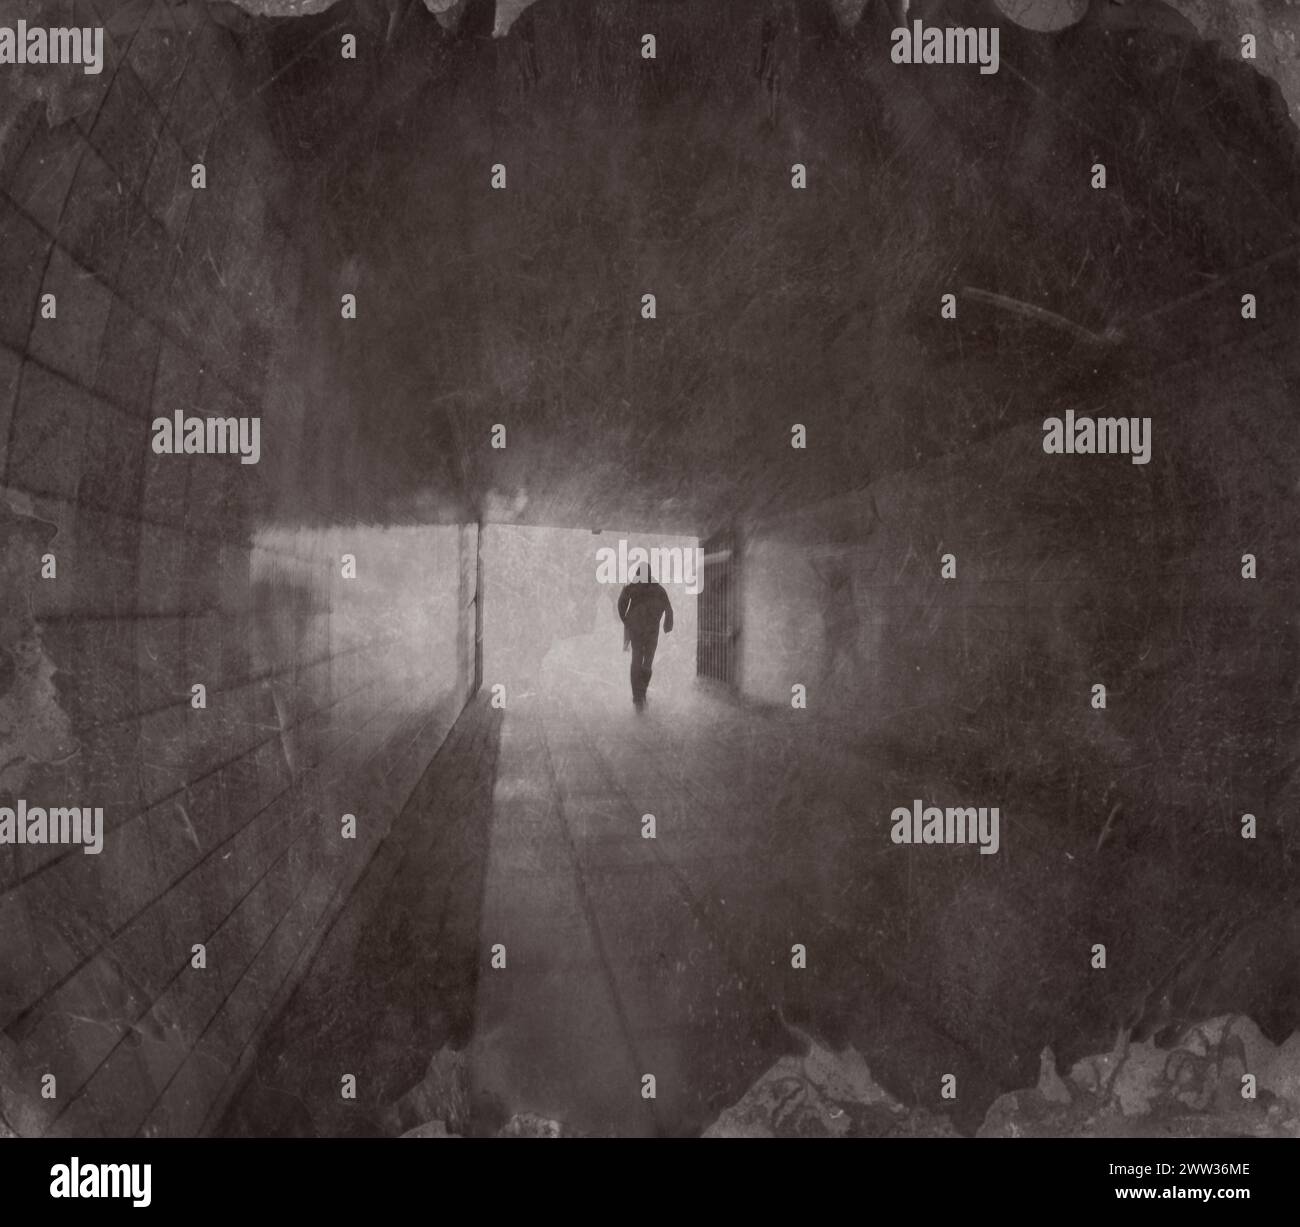 creative grungy image in sepia with scratches and spots of person walking in tunnel. Stock Photo